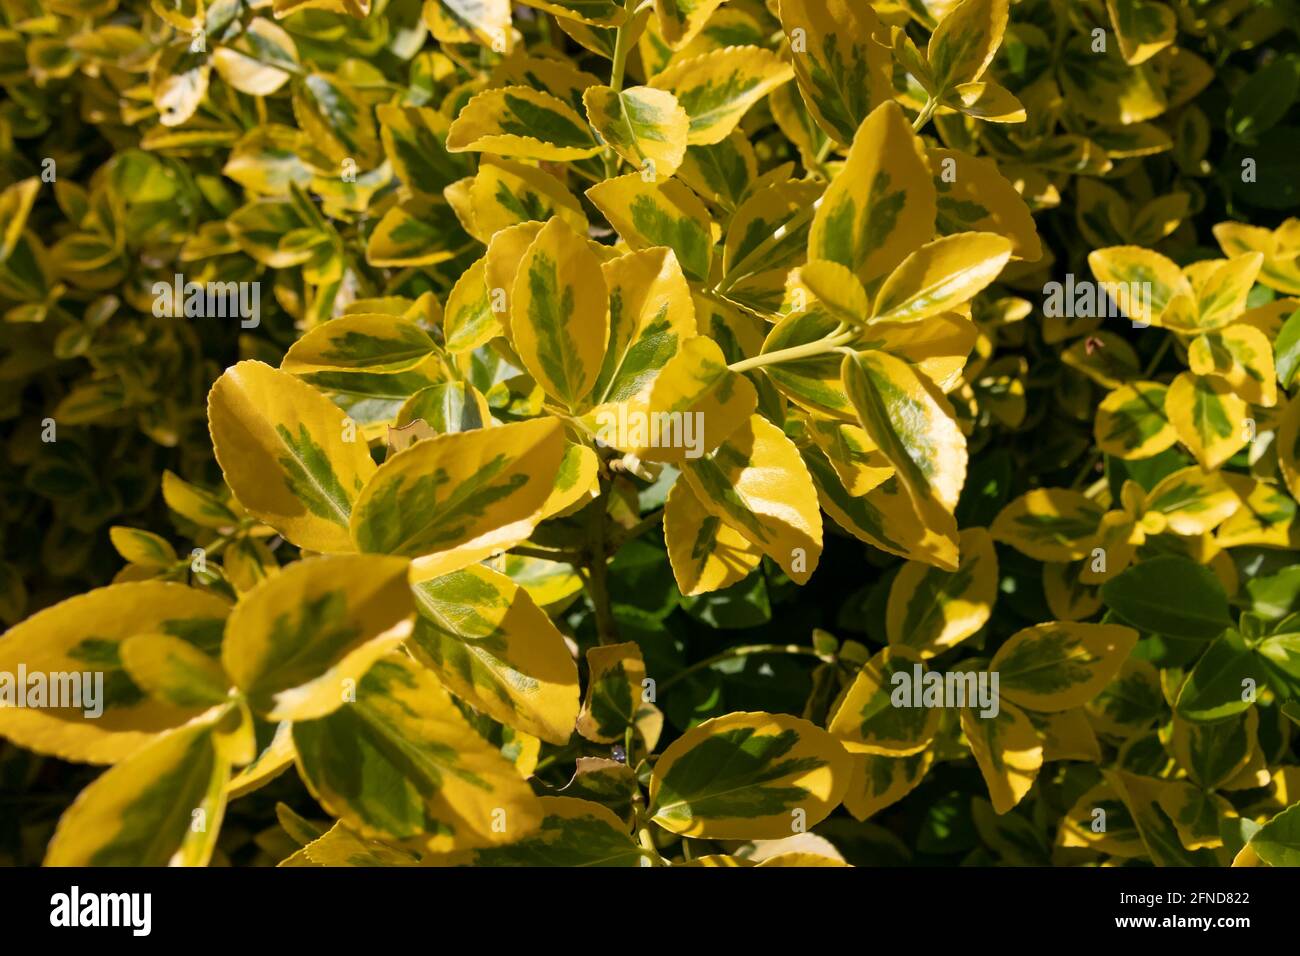 A closeup shot of a Golden Euonymus evergreen shrub with green and yellow oval-shaped leaves Stock Photo